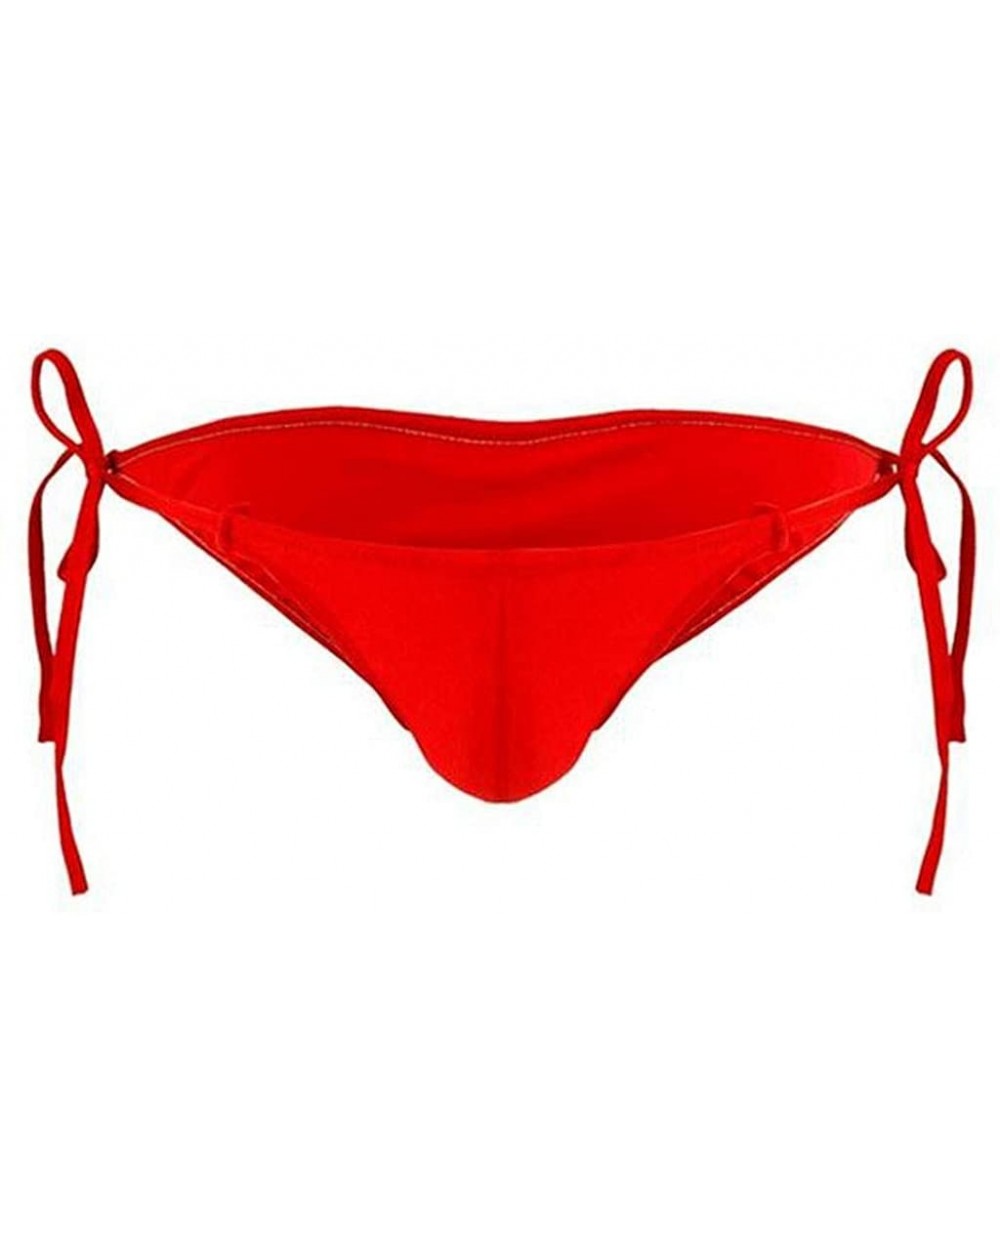 Men's Adjustable Drawstring Briefs-Side Bow Bulge Pouch Underwear Sissy Cute Panties Solid Breathable Lingerie - Red - C218WG...